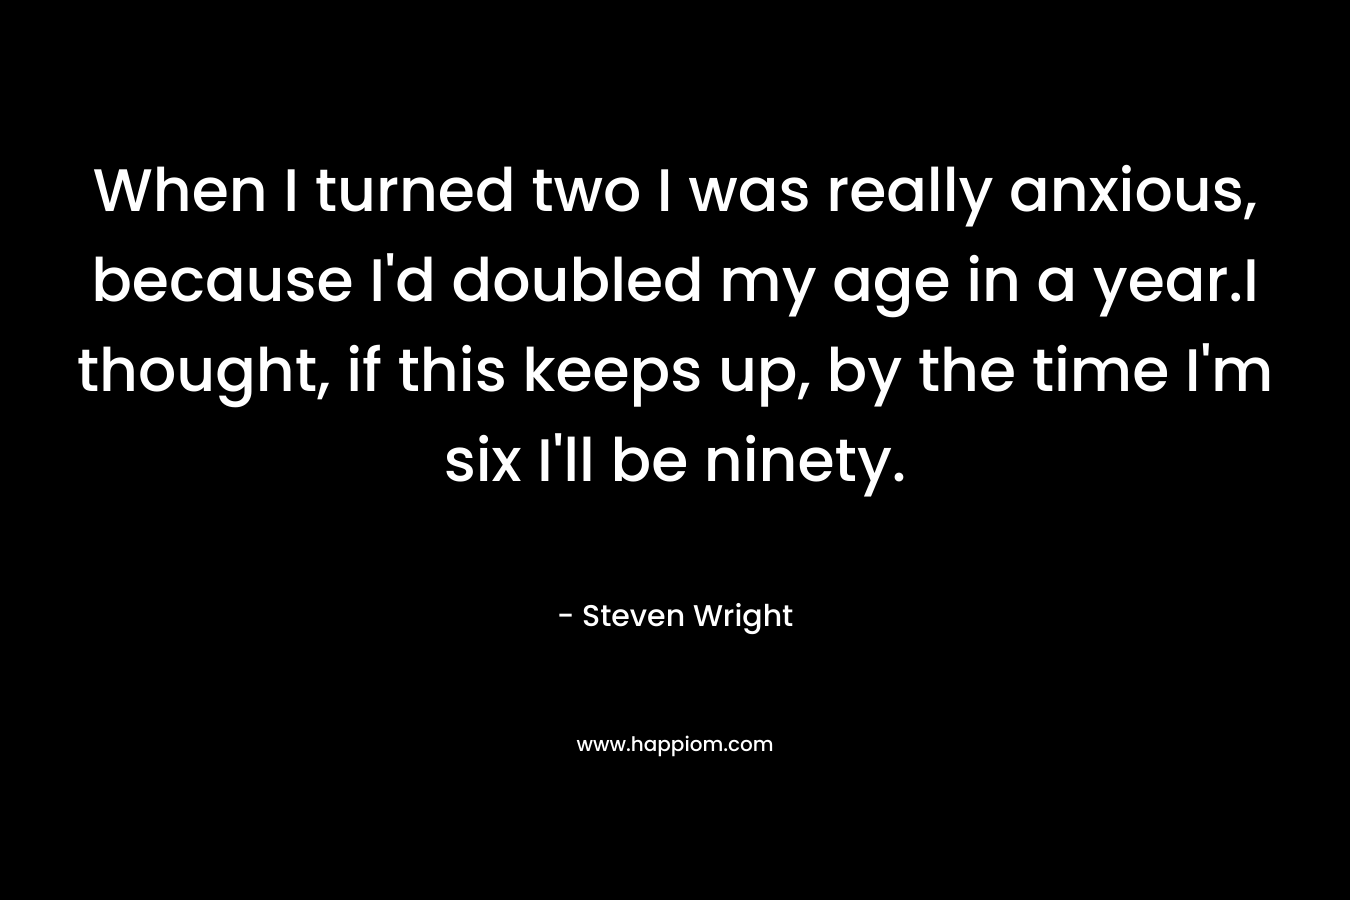 When I turned two I was really anxious, because I’d doubled my age in a year.I thought, if this keeps up, by the time I’m six I’ll be ninety. – Steven Wright